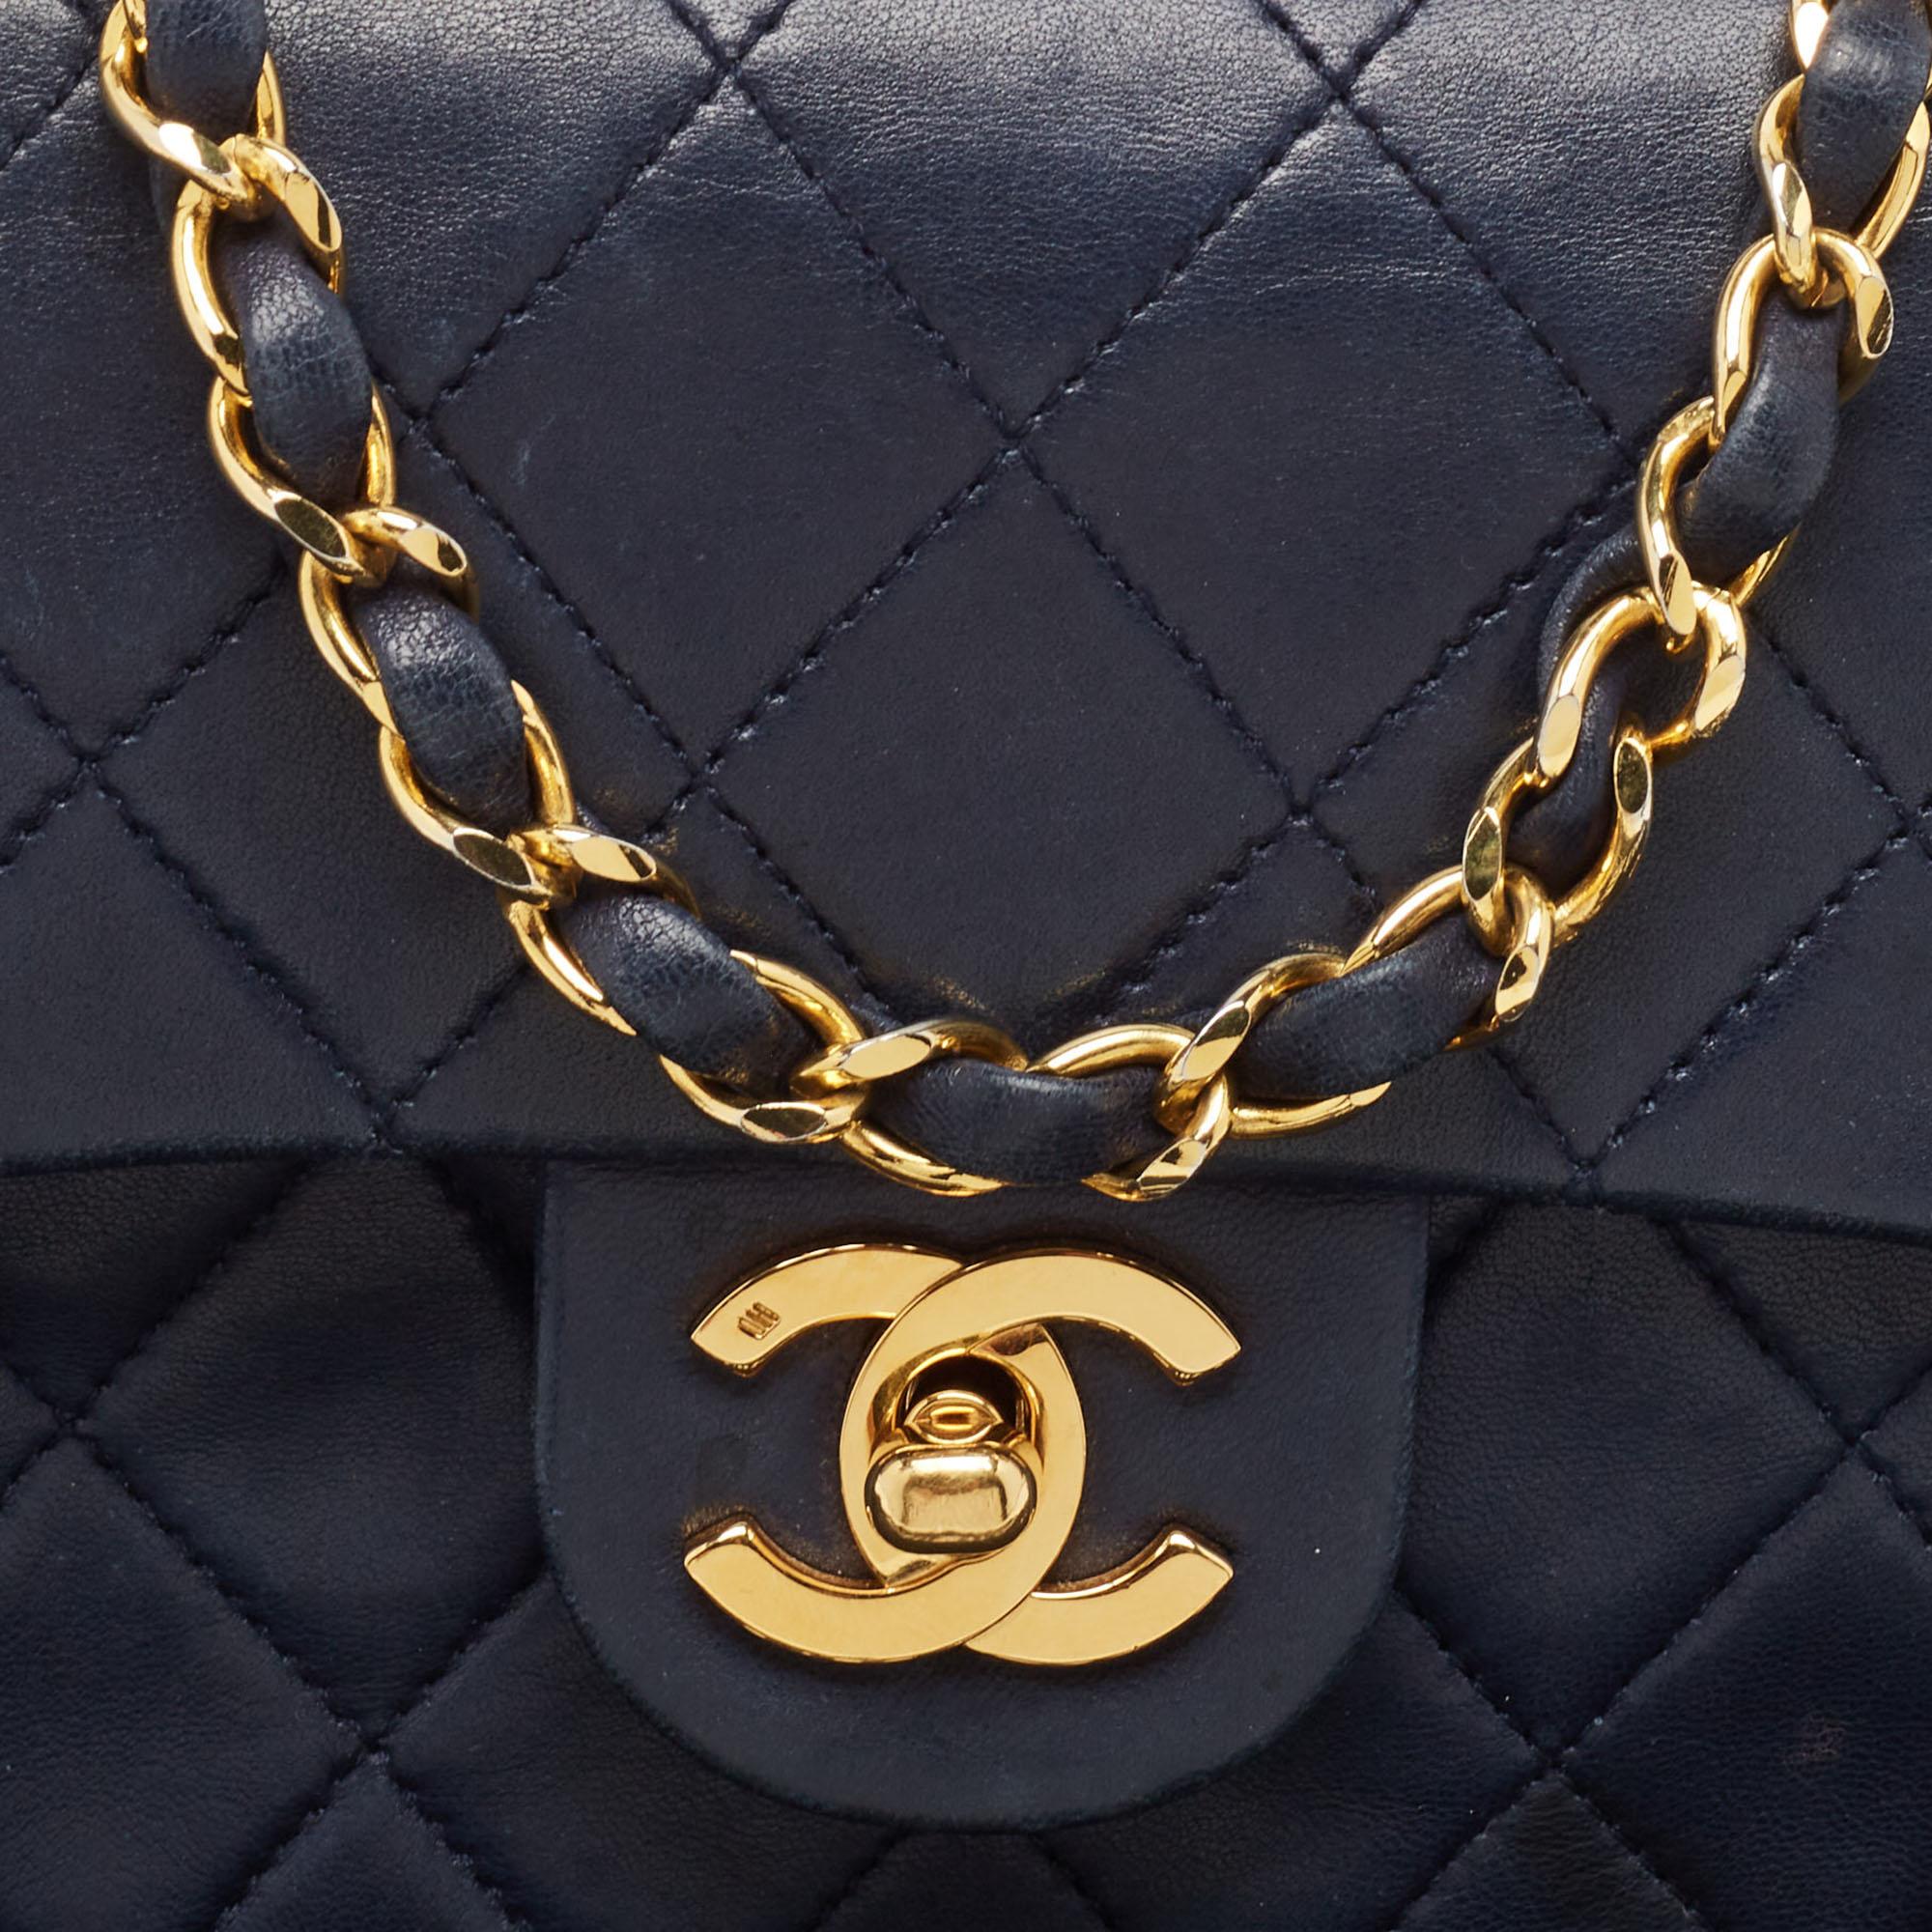 Chanel Navy Blue Quilted Leather Mini Vintage Square Flap Bag For Sale 6